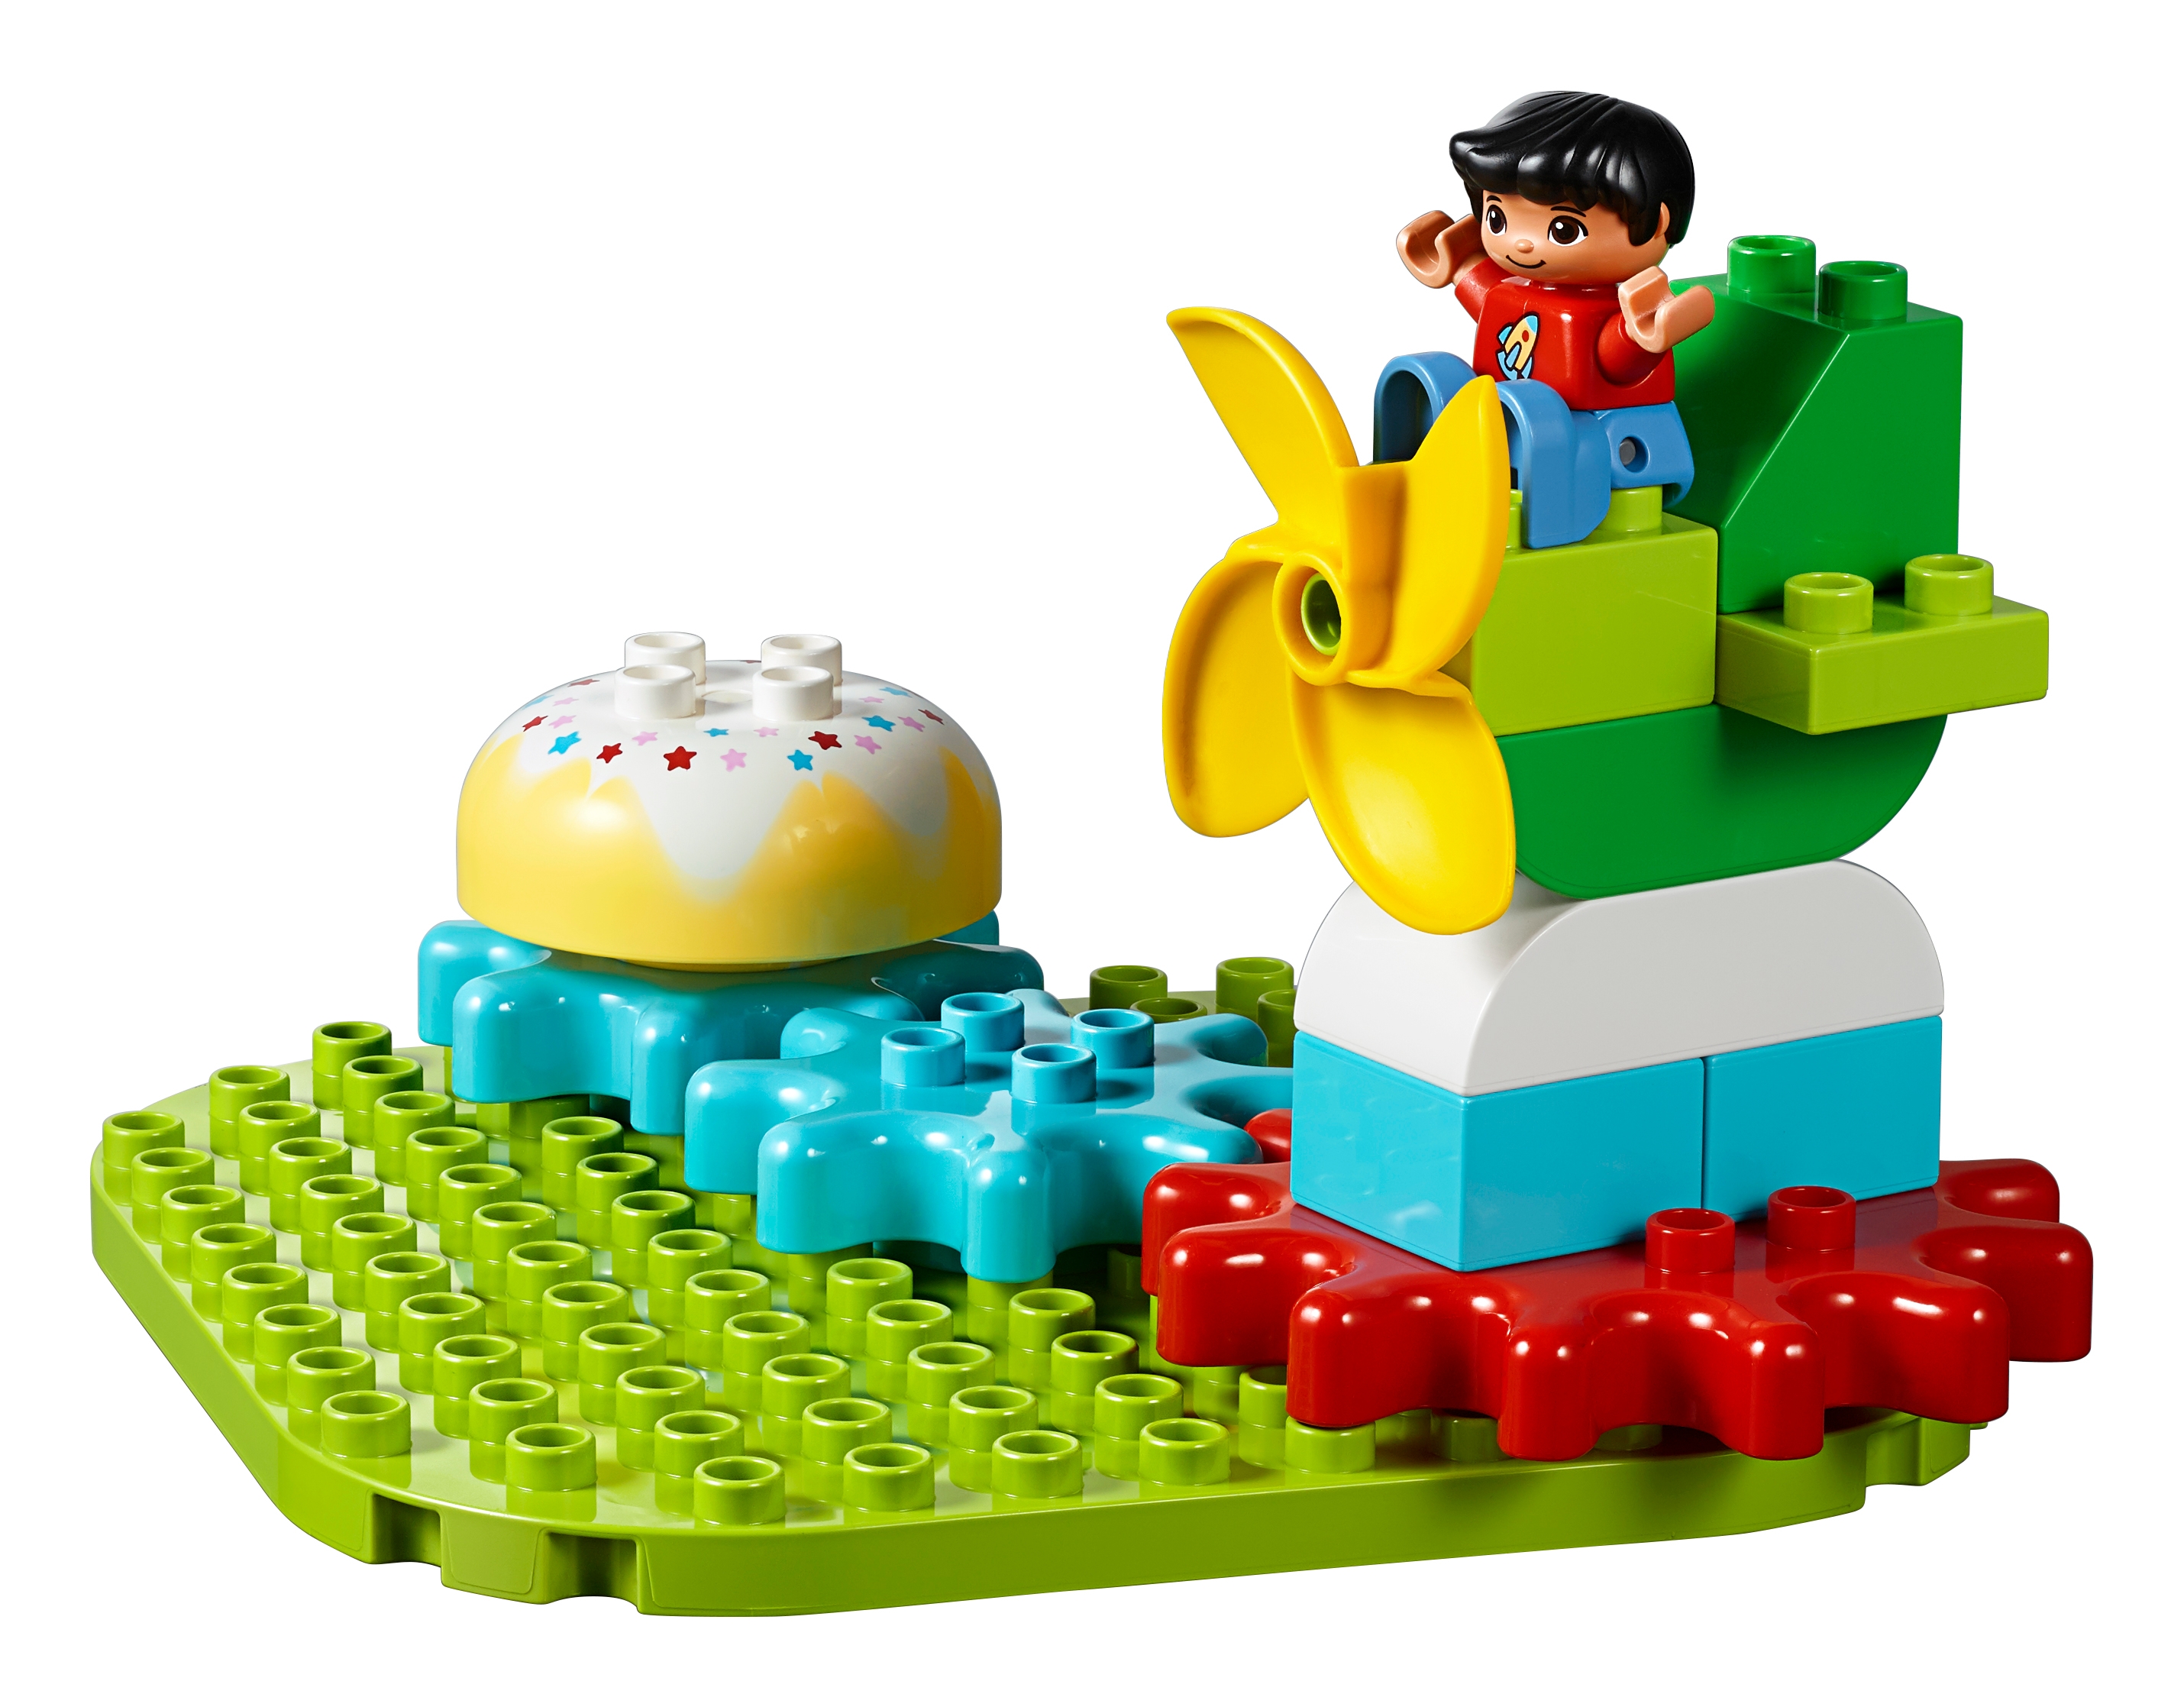 STEAM Park 45024 | LEGO® Education | Buy online at the